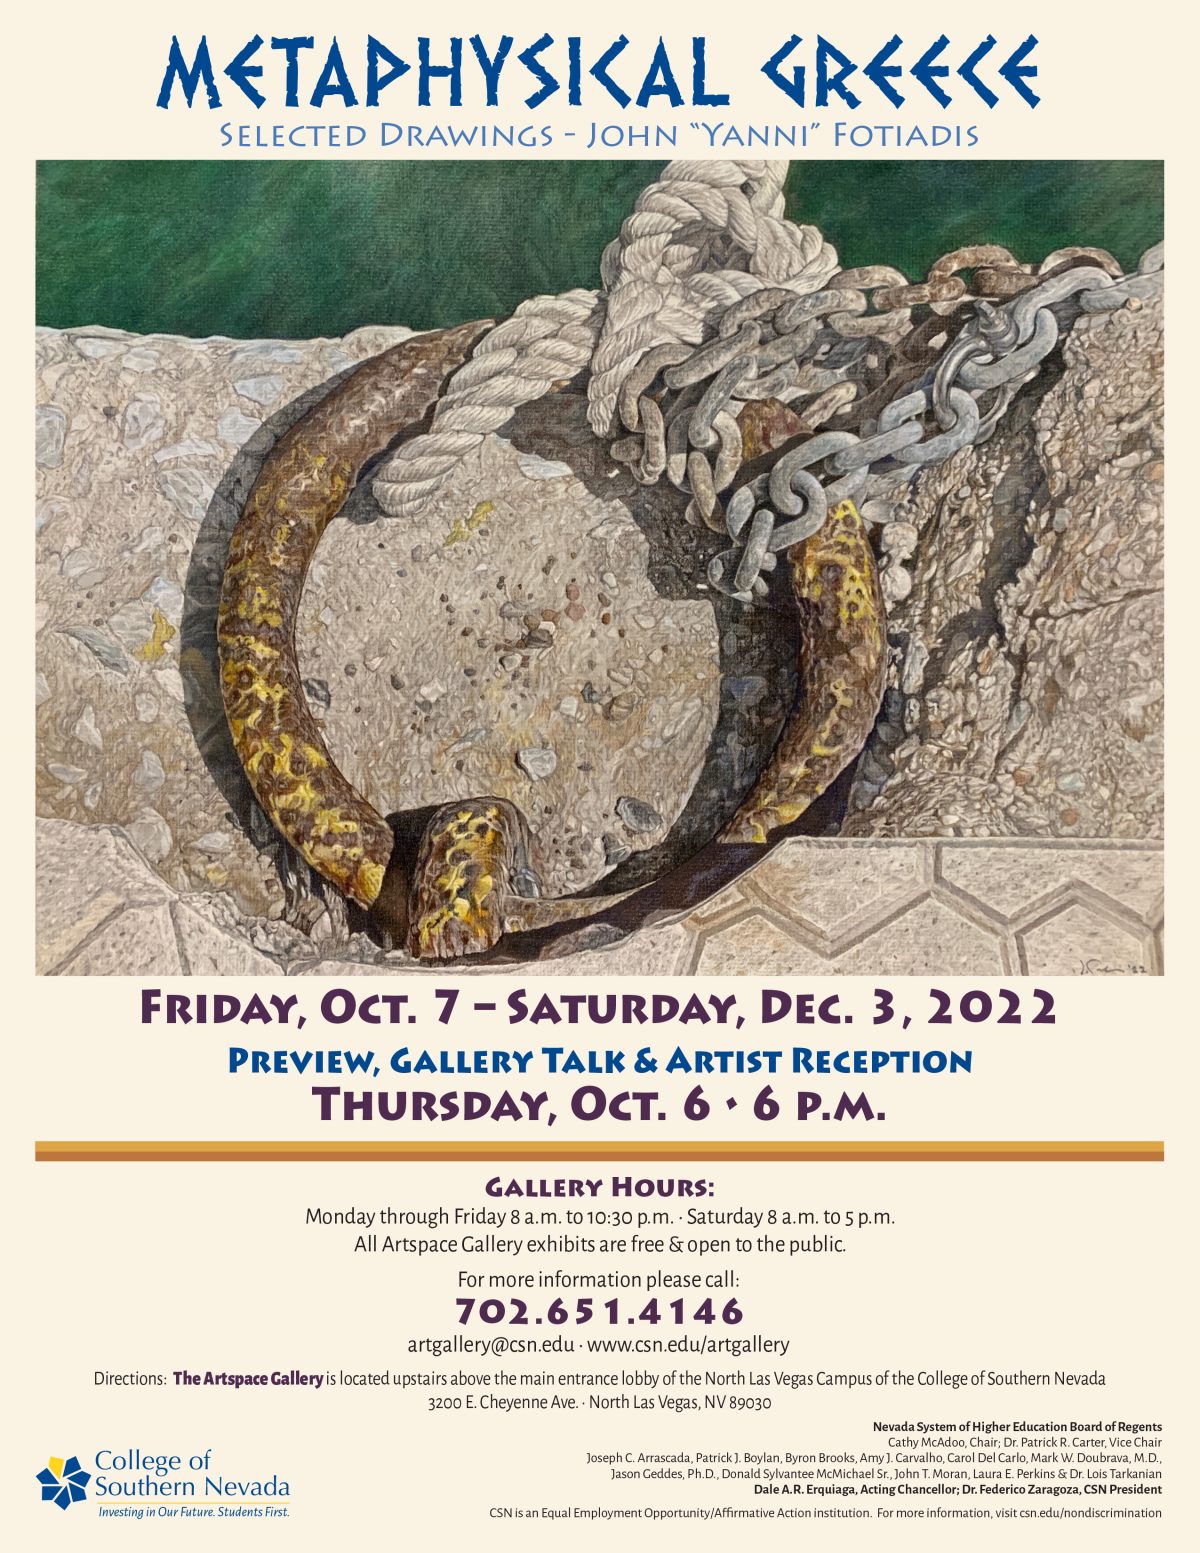 “Metaphysical Greece” at The College of Southern Nevada, October 7th through December 3rd 2022